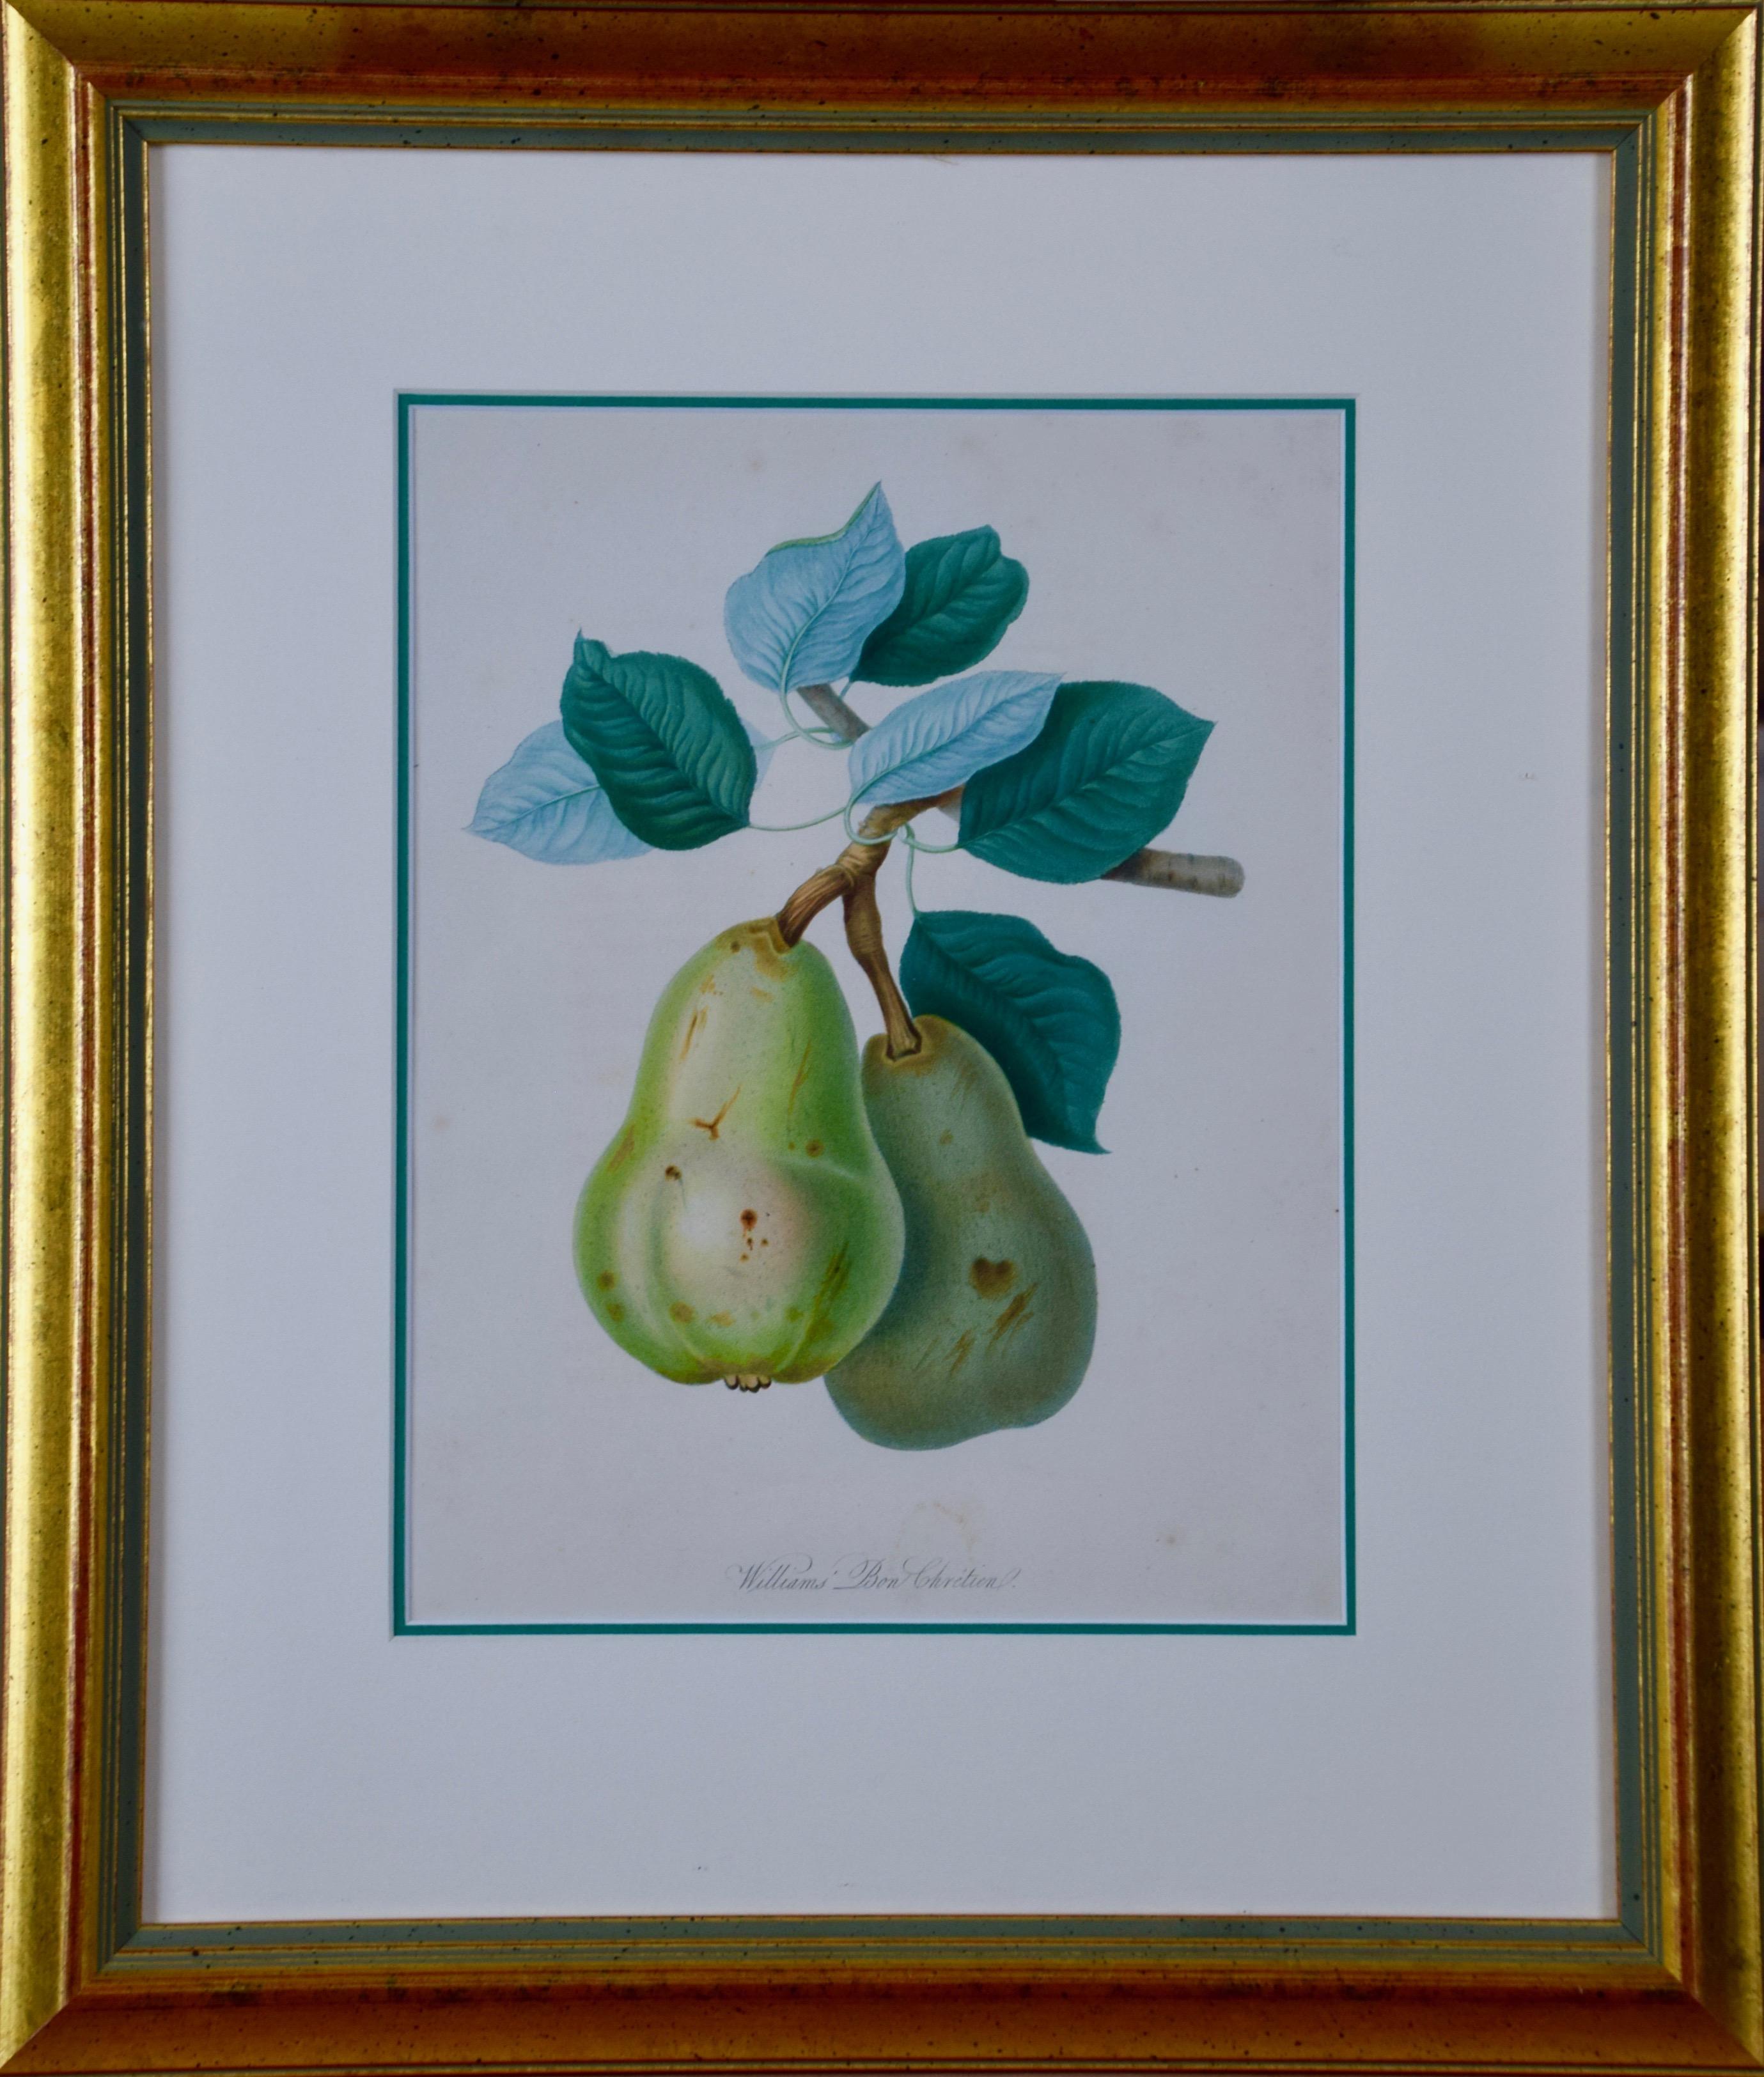 Unknown Figurative Print - Hand Colored Engraving of a William's Bon Chretien, Heirloom Pear, Early 1800's